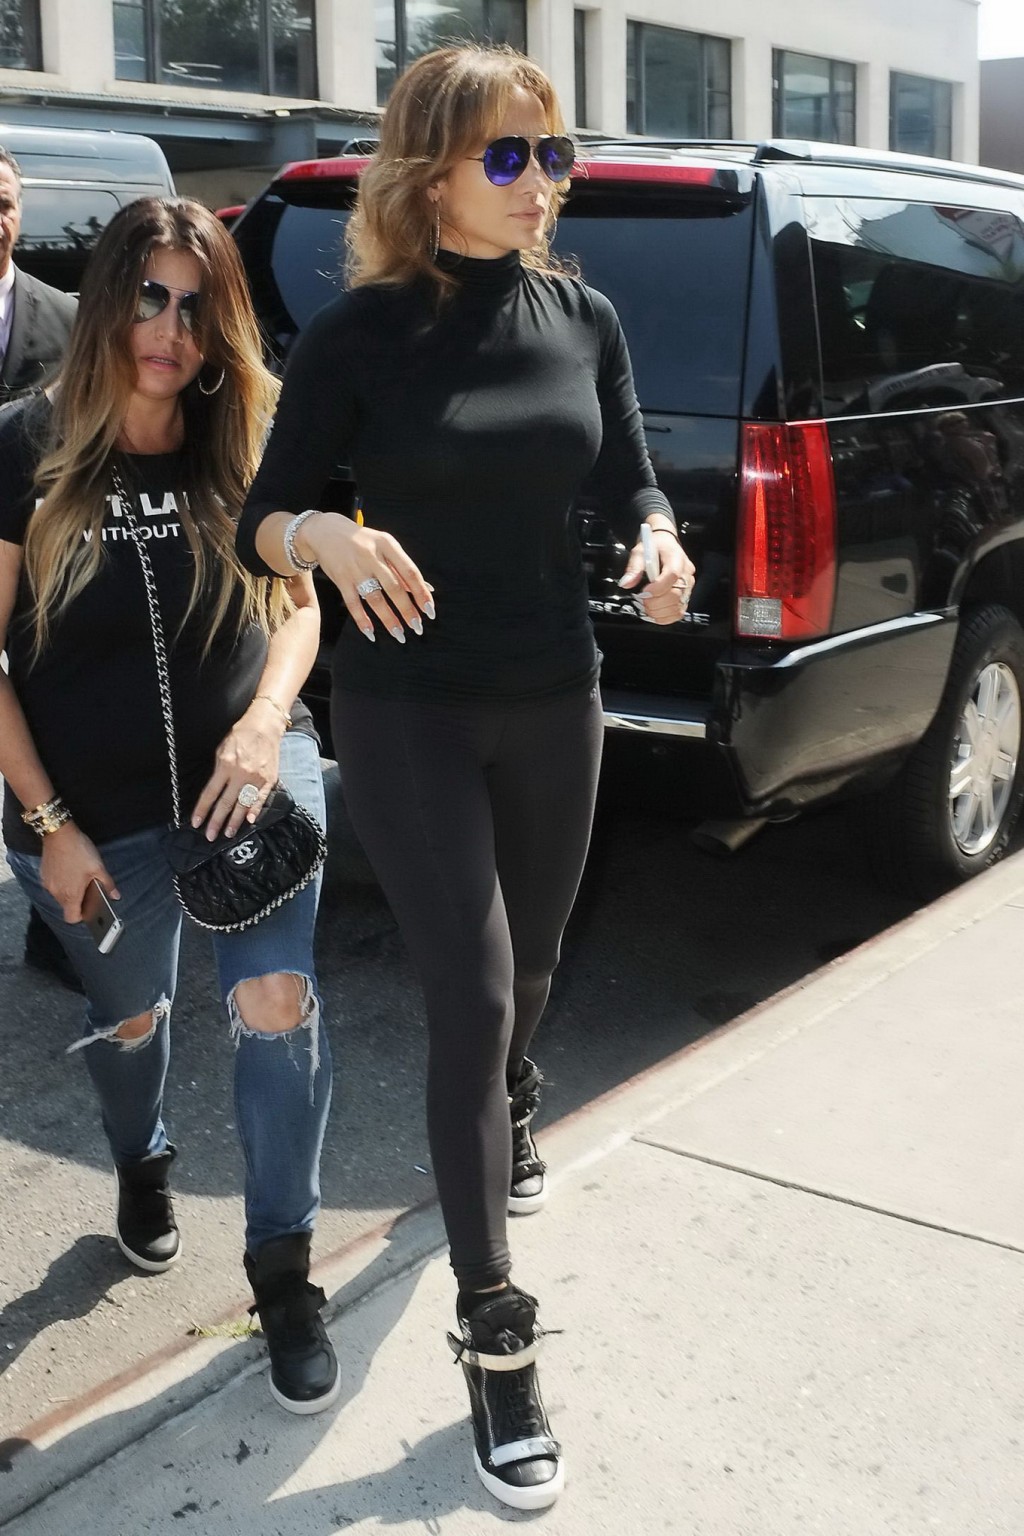 Jennifer Lopez showing round ass in a black tights while out in NYC #75186591